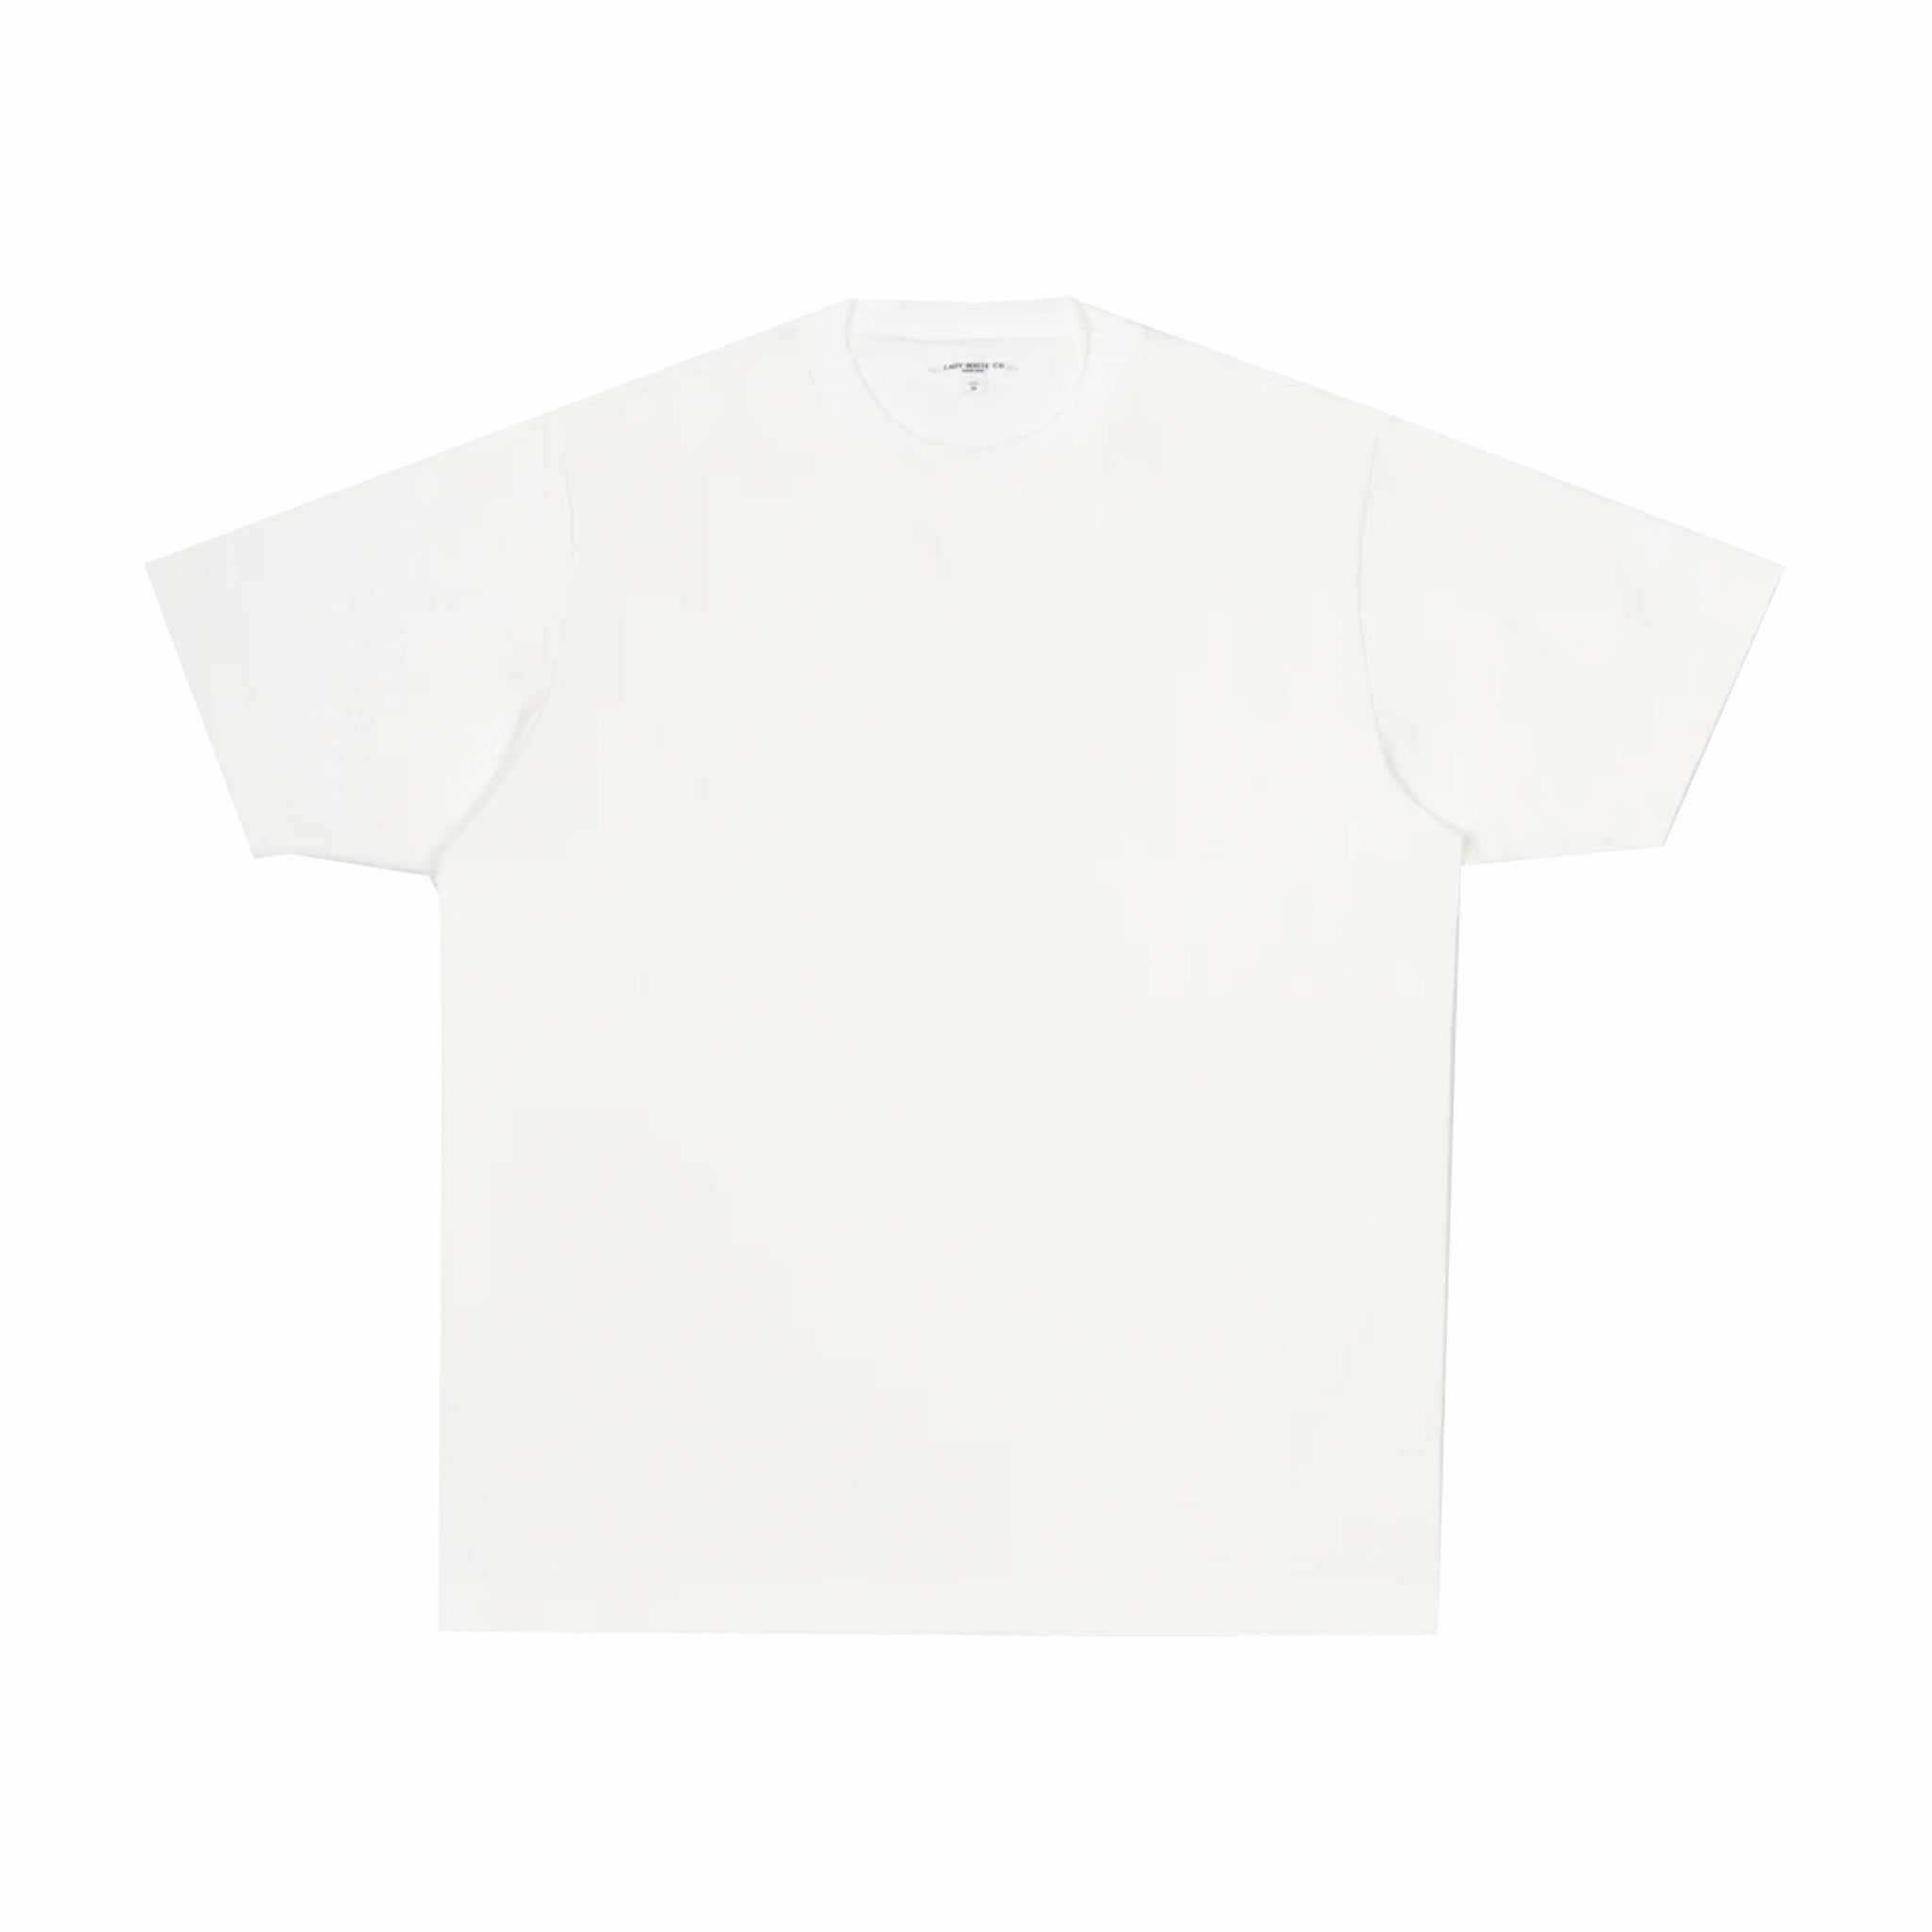 Lady White Co. Rugby T-Shirt (White) - August Shop